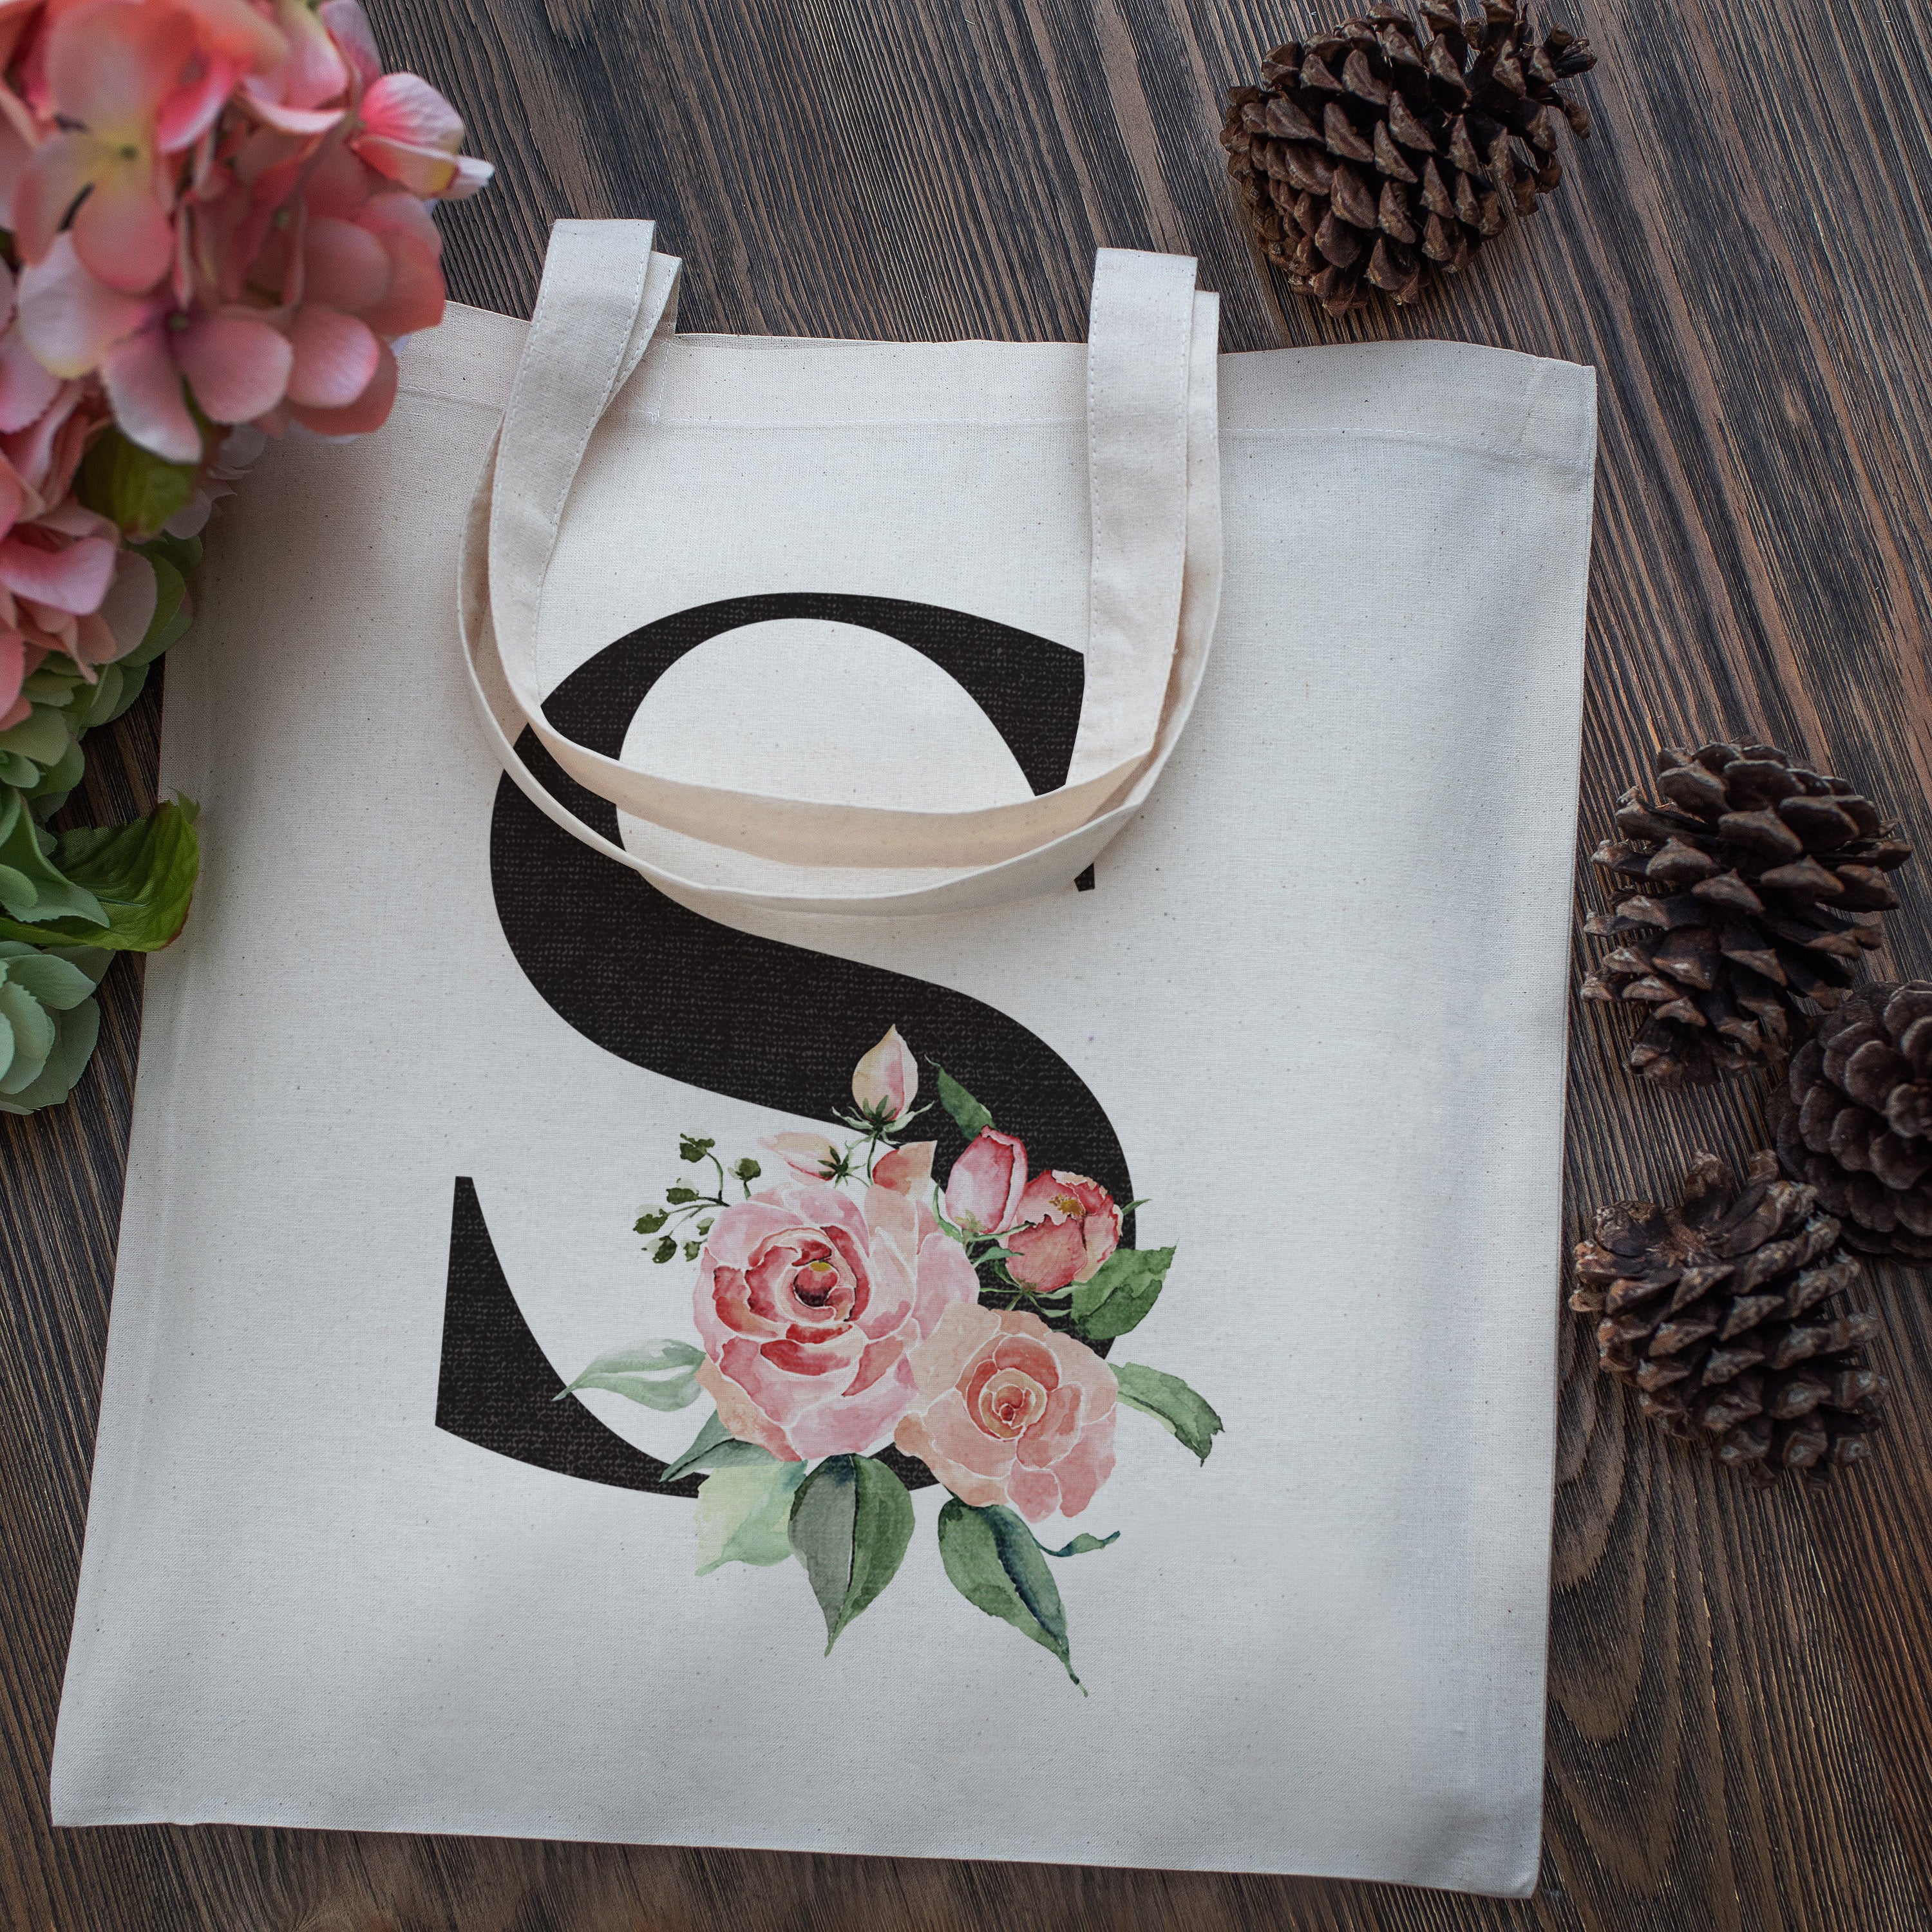 Buy VVWV Flower Printed Canvas Tote Bags For Women, Stylish